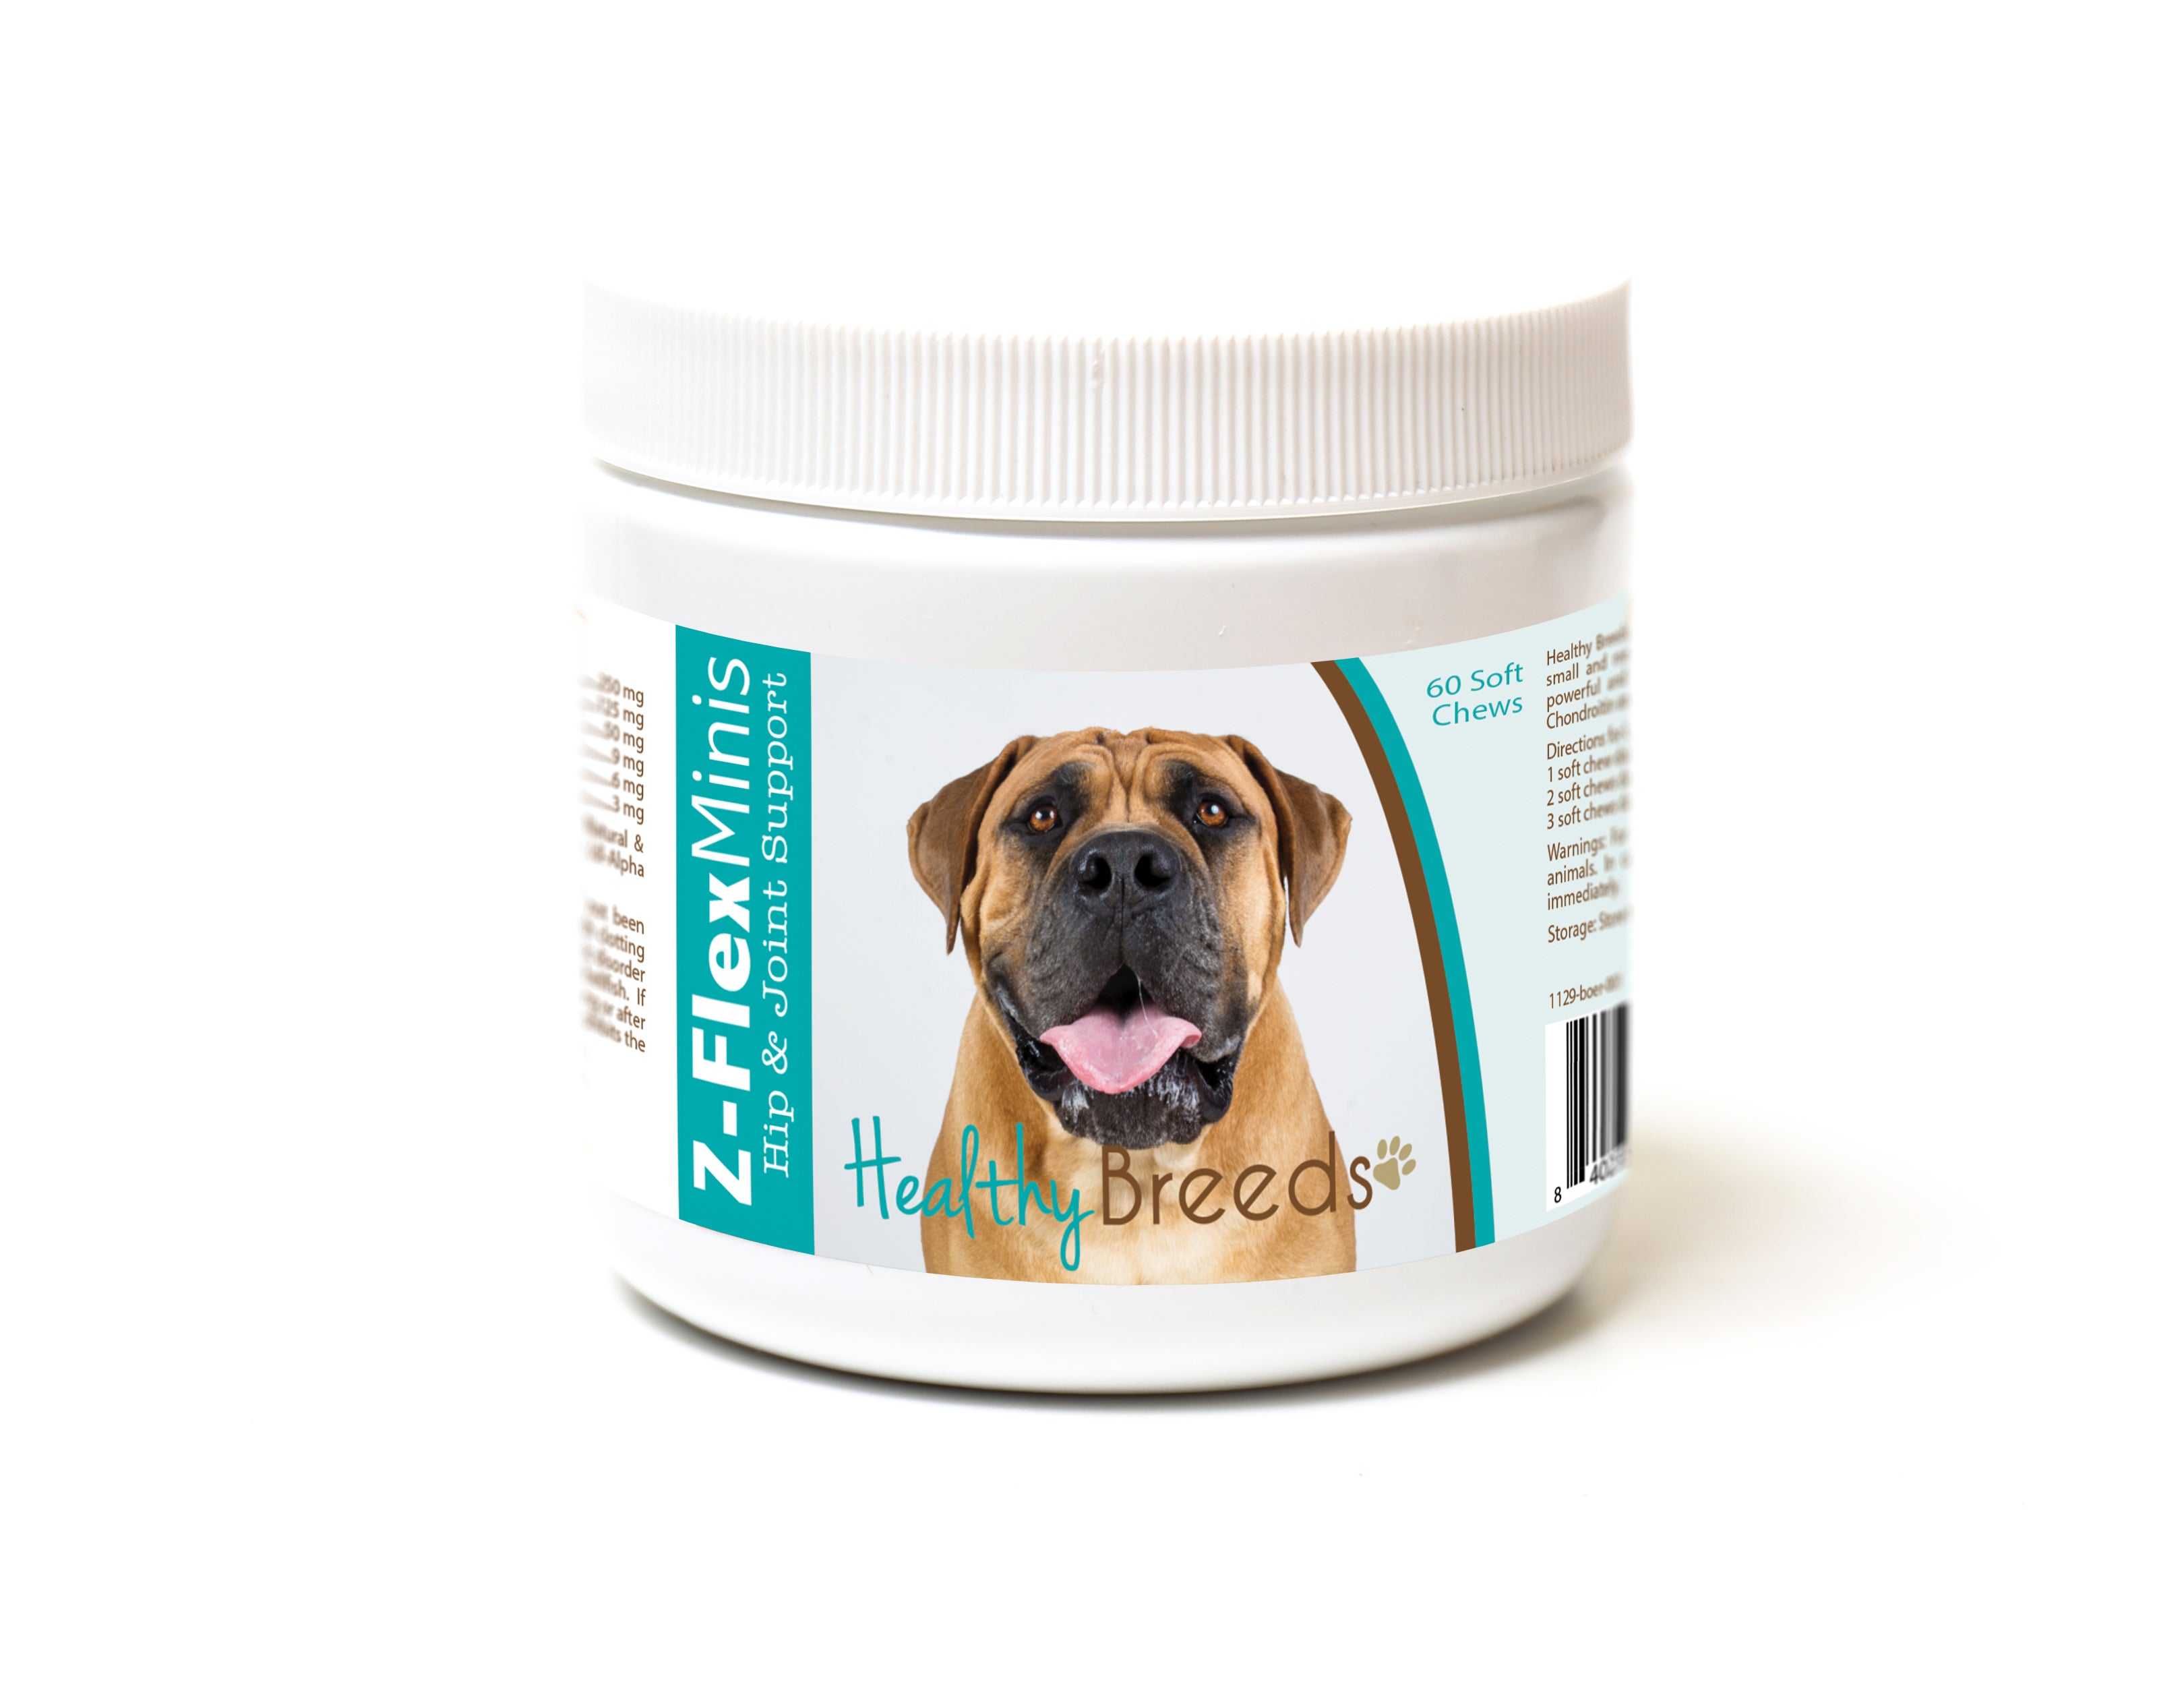 Boerboel Z-Flex Minis Hip and Joint Support Soft Chews 60 Count